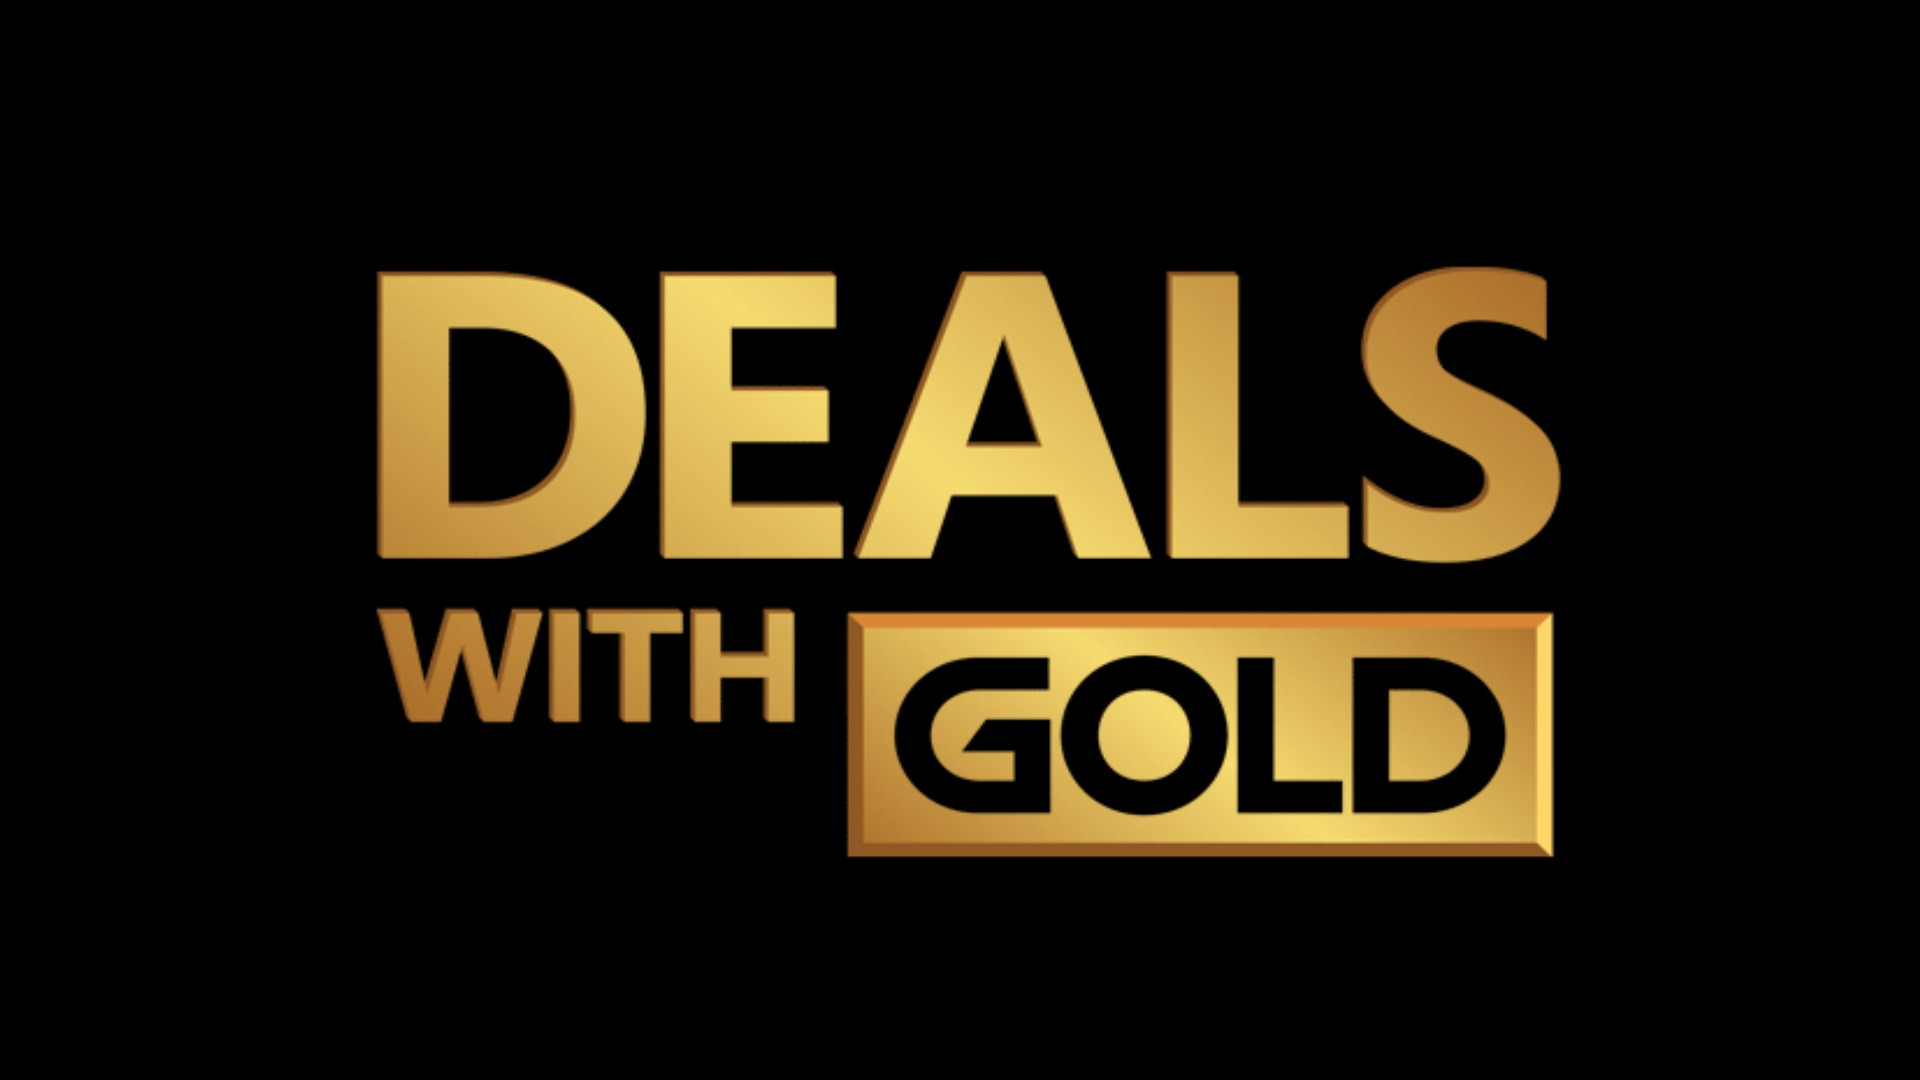 Deals with Gold semaine 01